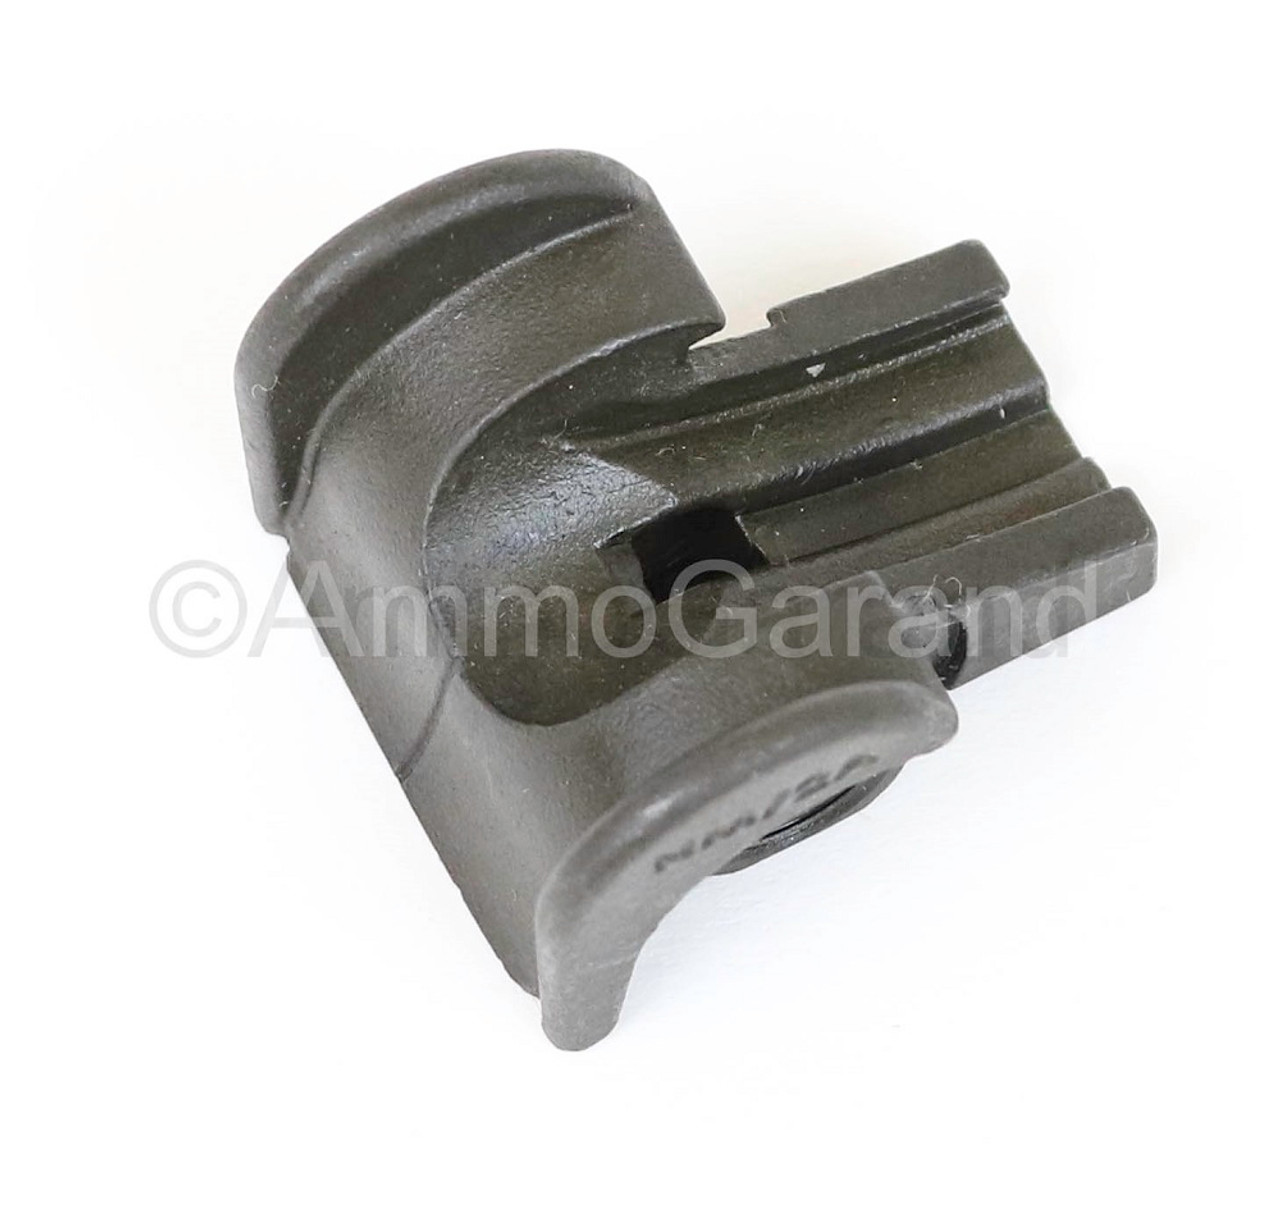 M1 Garand National Match Rear Sight Base NM/2A for Hooded Apertures fits M14 M1A - New